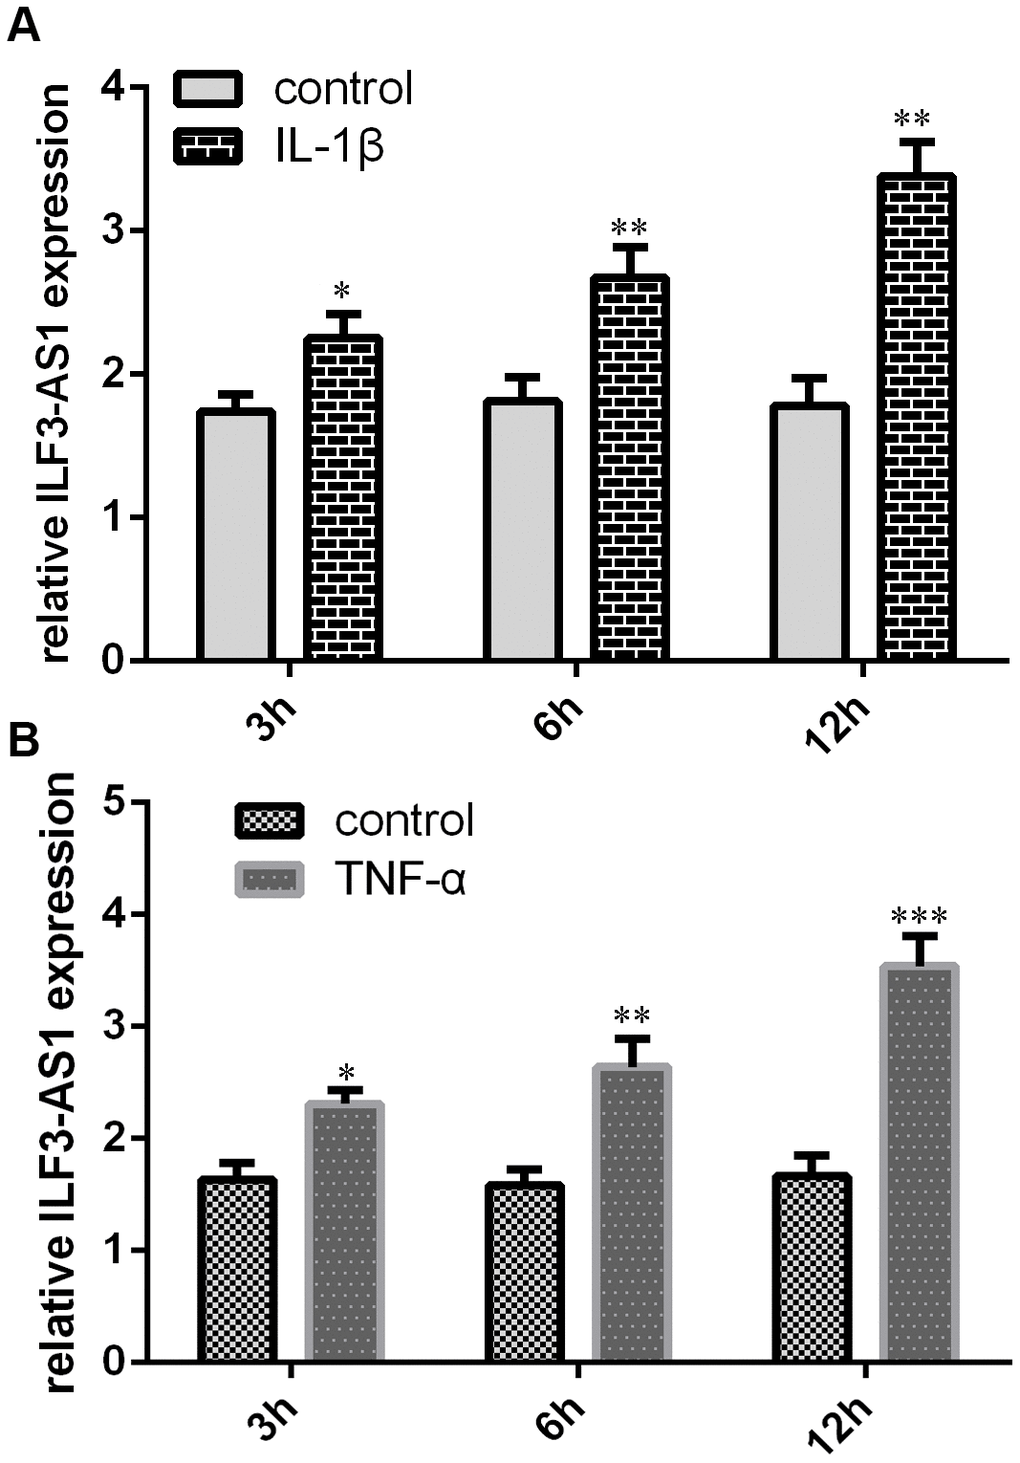 qRT-PCR analysis showing IL-1β and TNF-α induce ILF3-AS1 expression. Shown are levels of ILF3-AS1 expression induced by IL-1β (A) and TNF-α (B) in astrocytes. *p